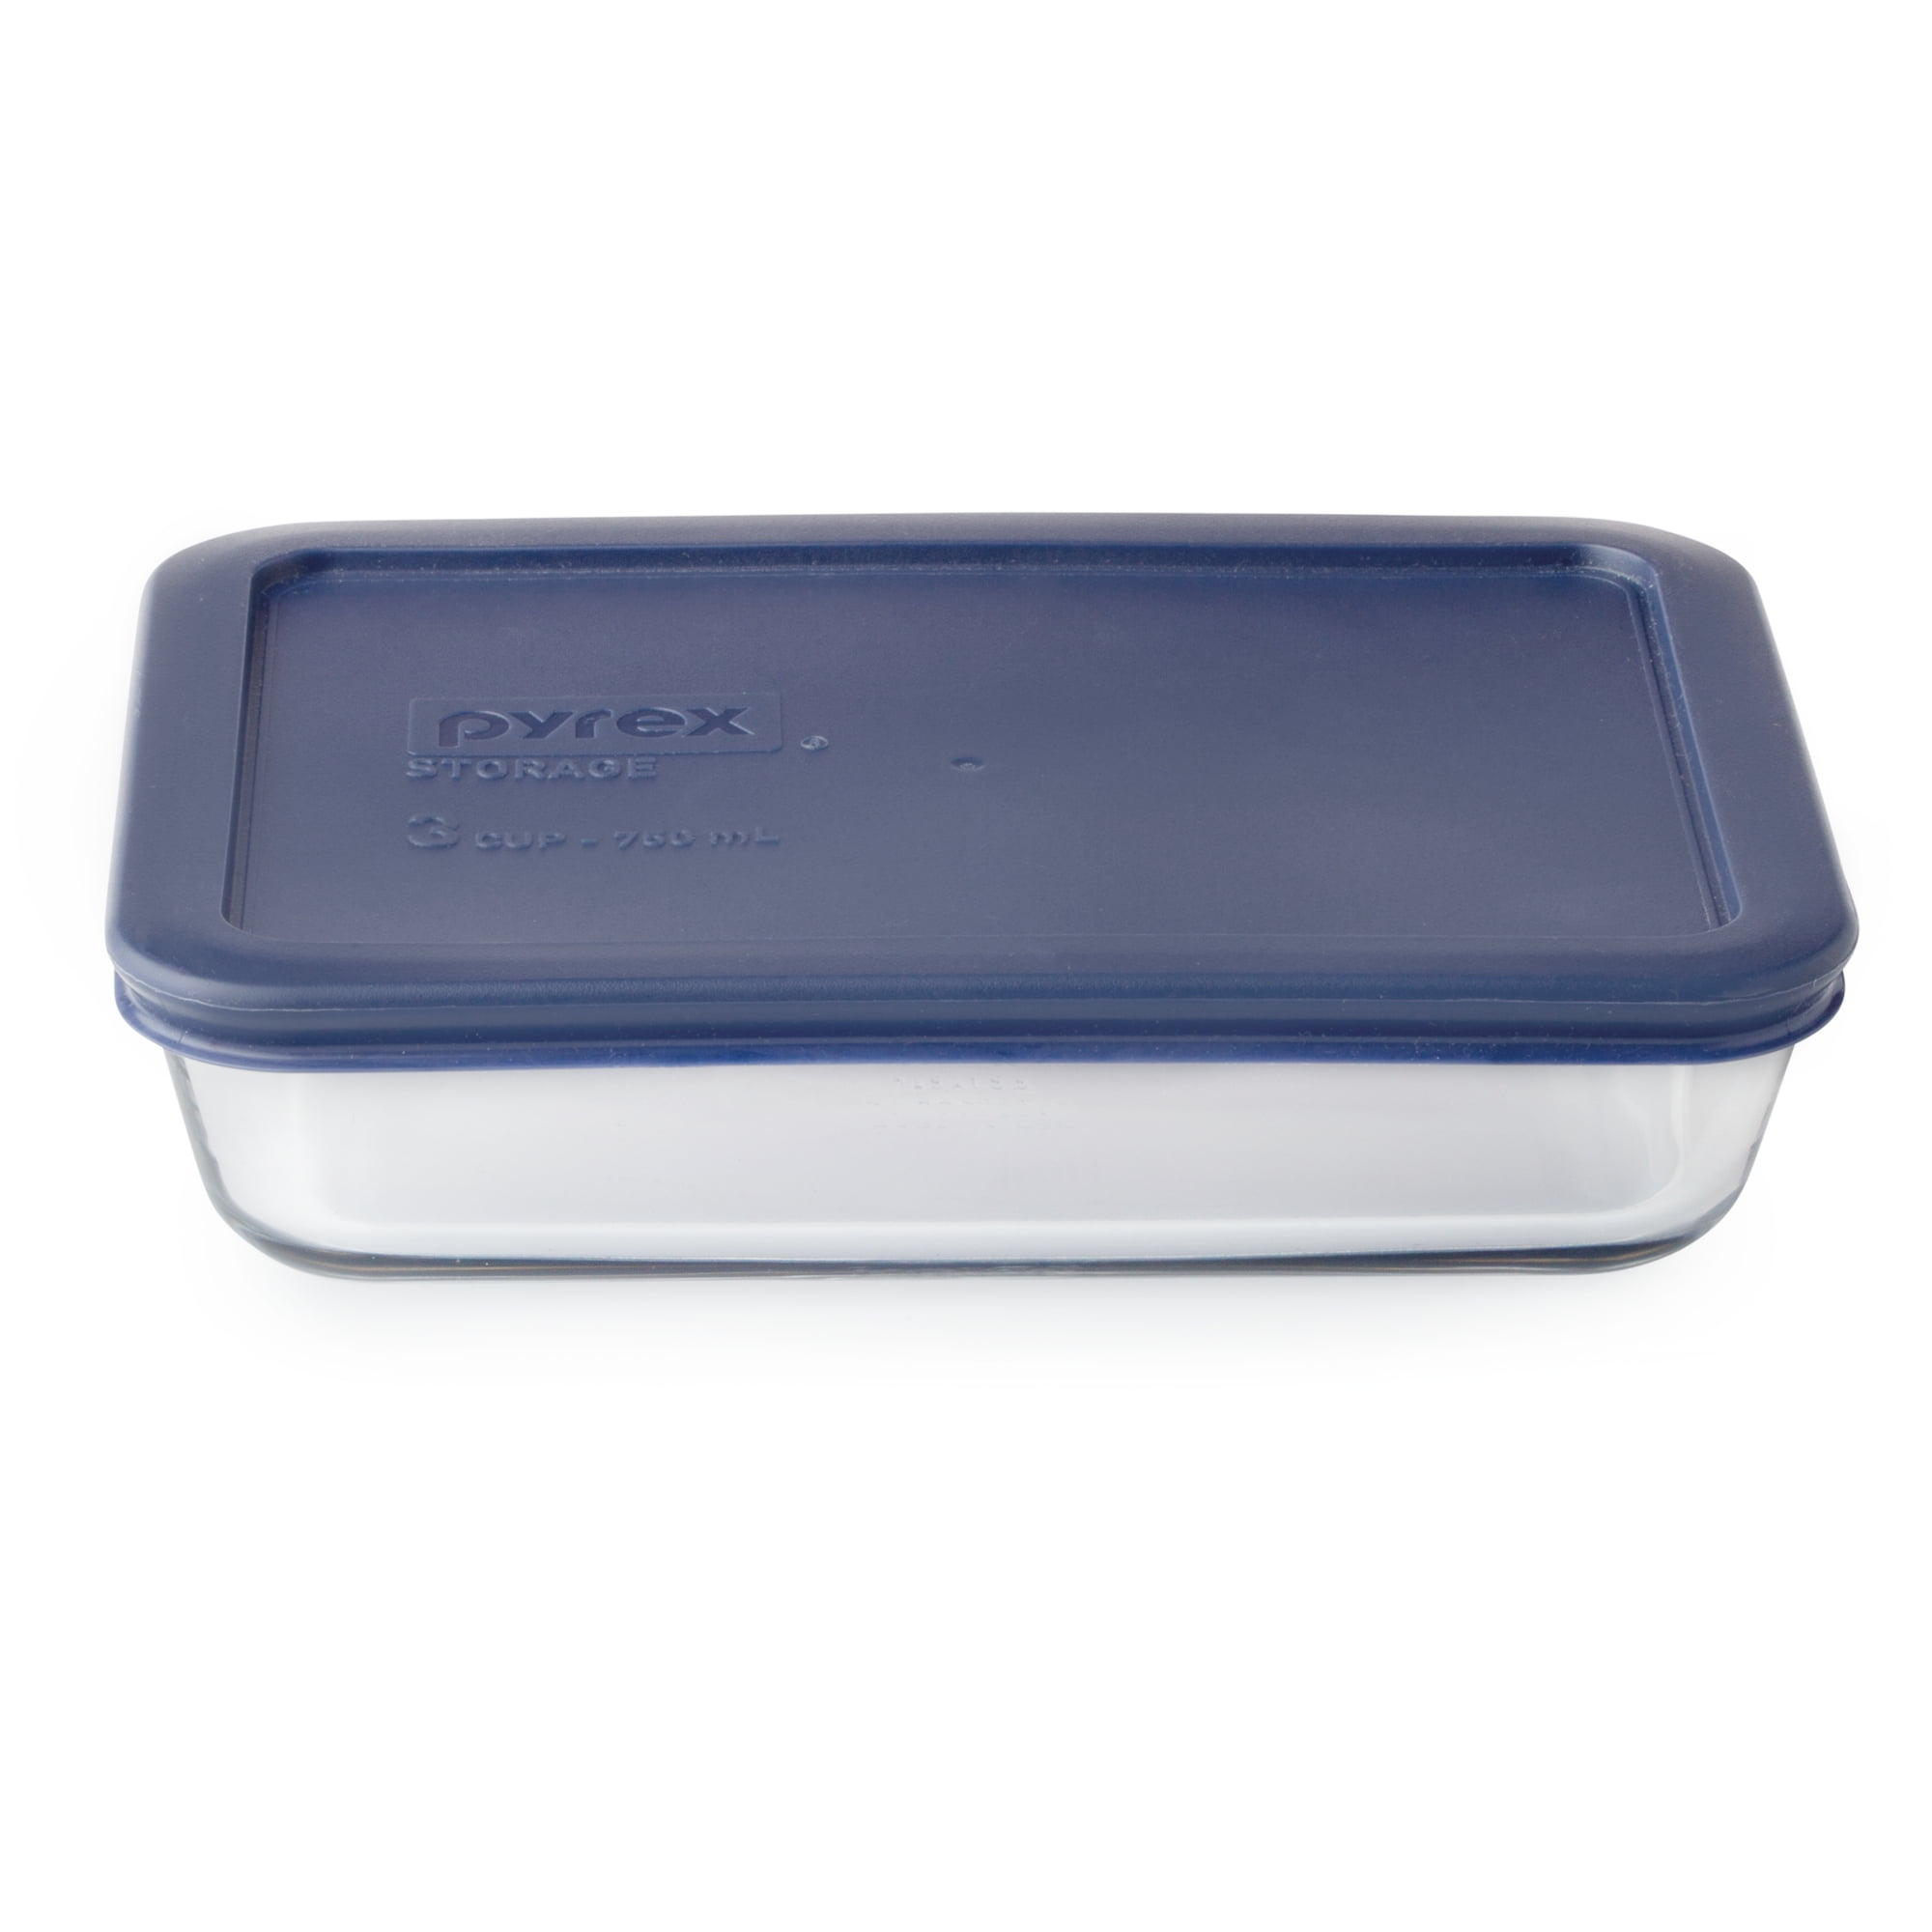 Pyrex Simply Store 10-piece 3-cup Meal Plan Set, Food Storage Container  Sets